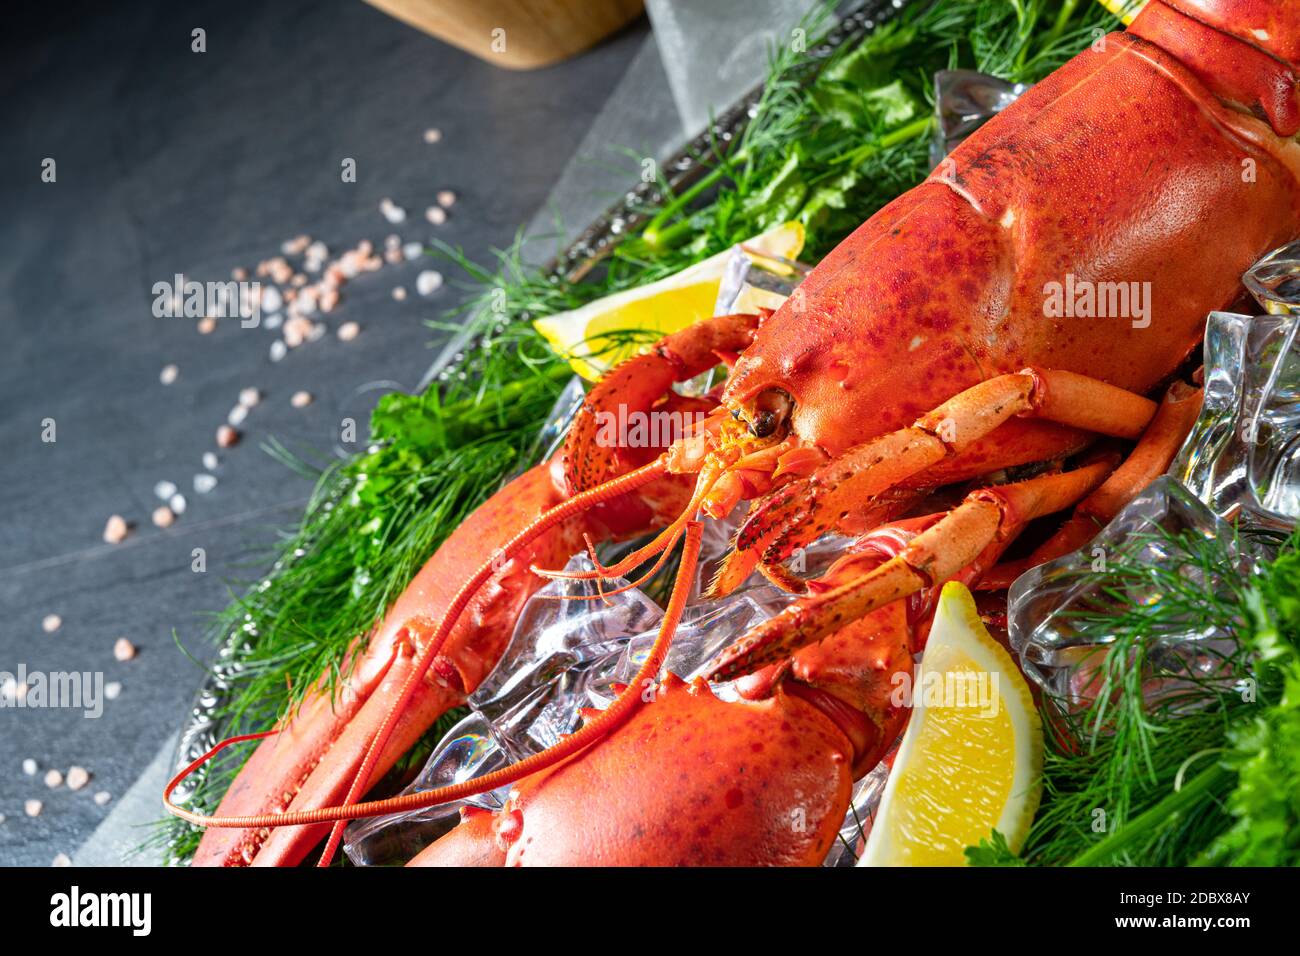 the cooked lobster on ice Stock Photo